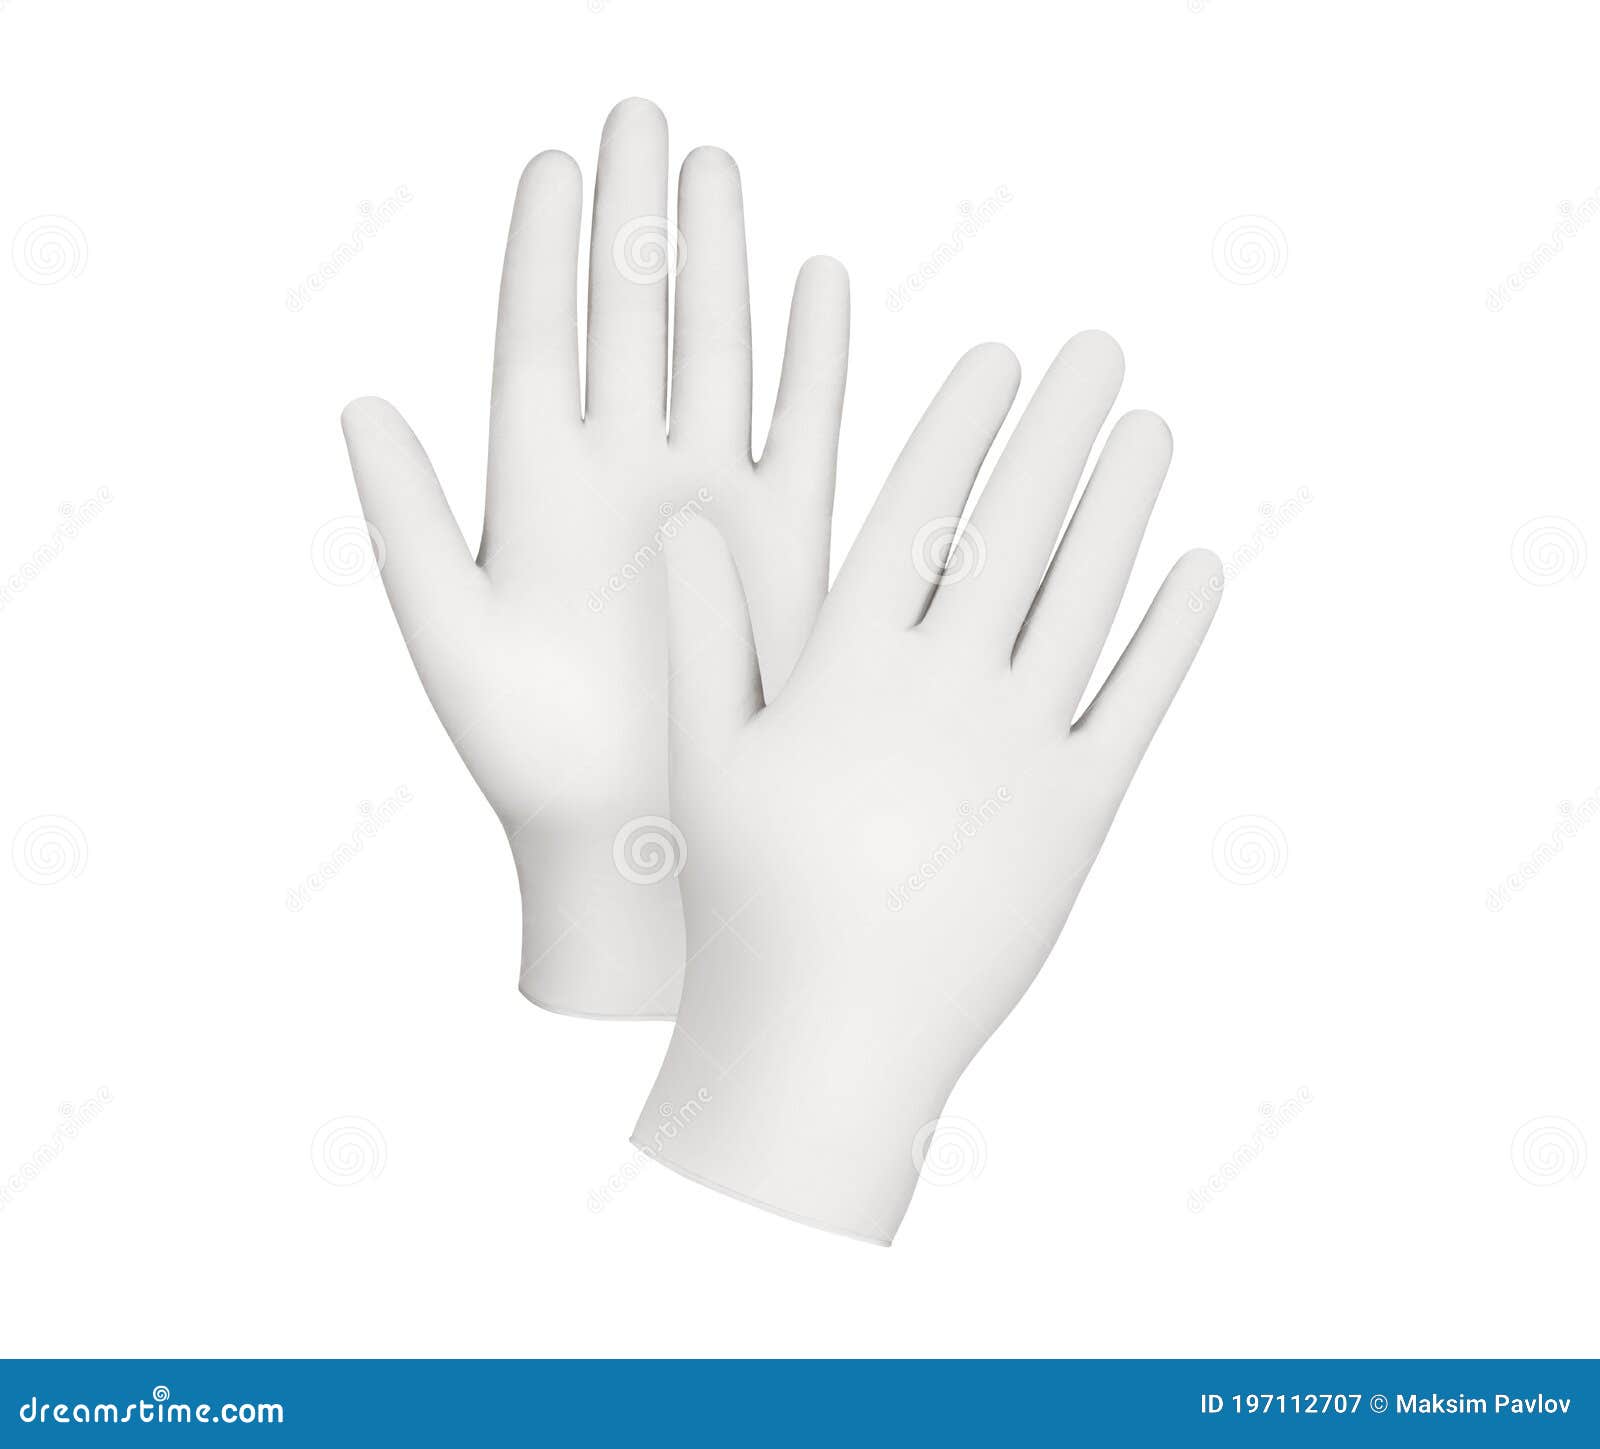 Medical Nitrile Gloves.Two White Surgical Gloves Isolated on White ...